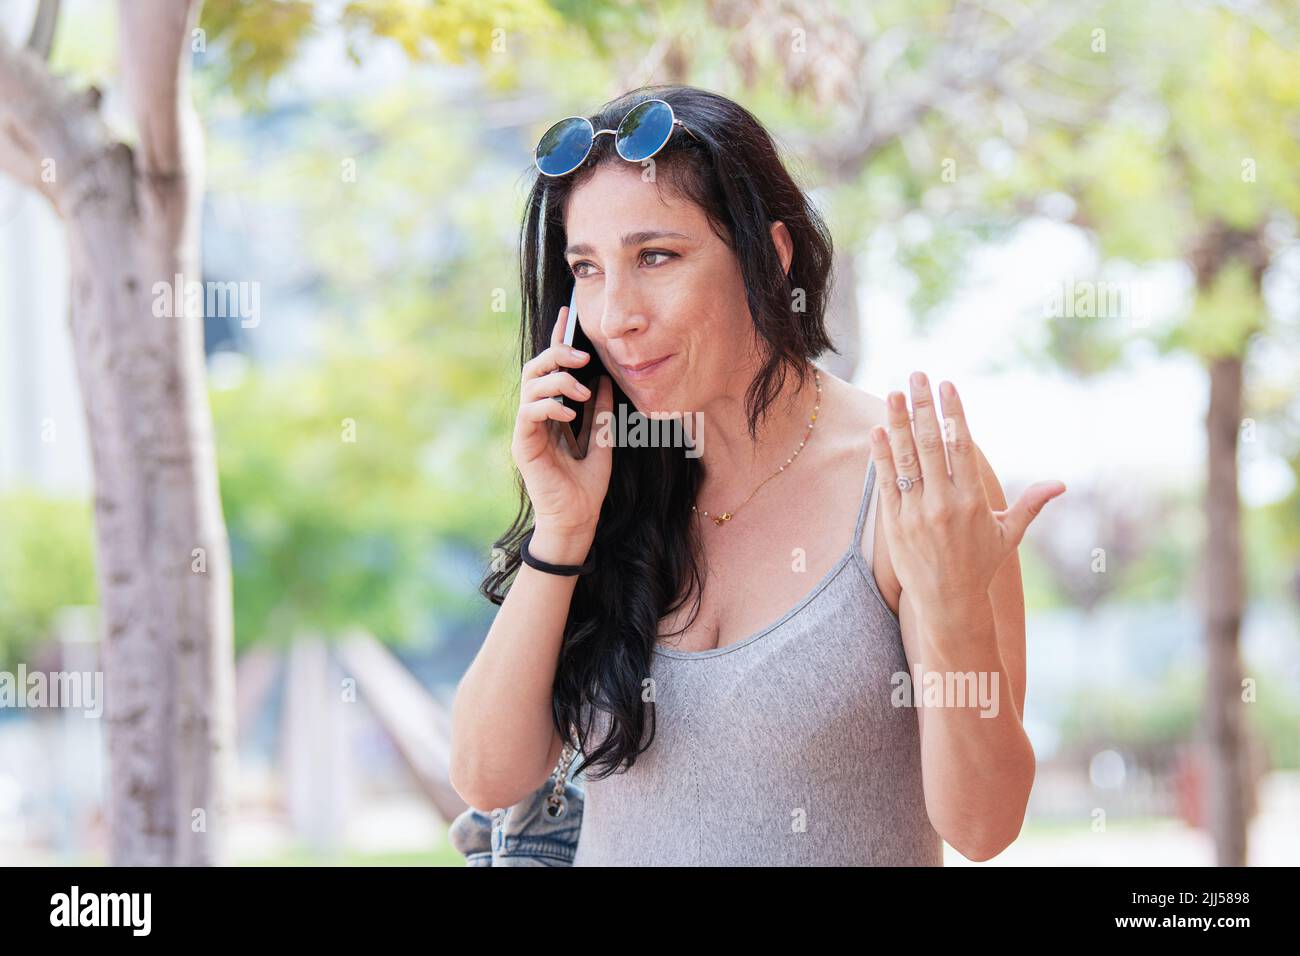 Adult woman on the street talking on the phone while gesturing with her other hand Stock Photo